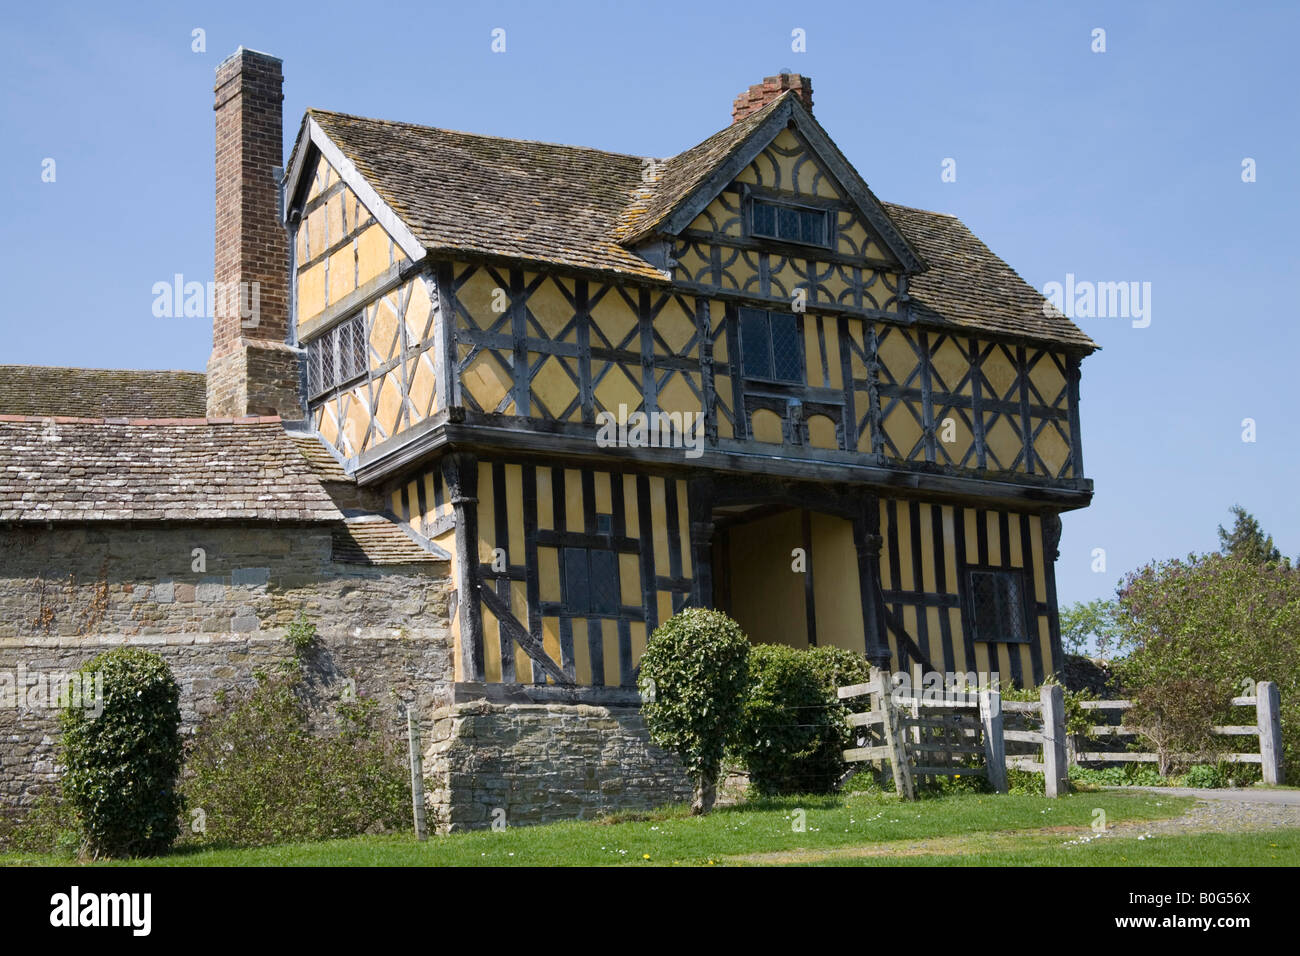 Craven Arms Shropshire England UK May The impressive Jacobean gatehouse entrance to Stokesay Castle a 13thc fortified manor Stock Photo